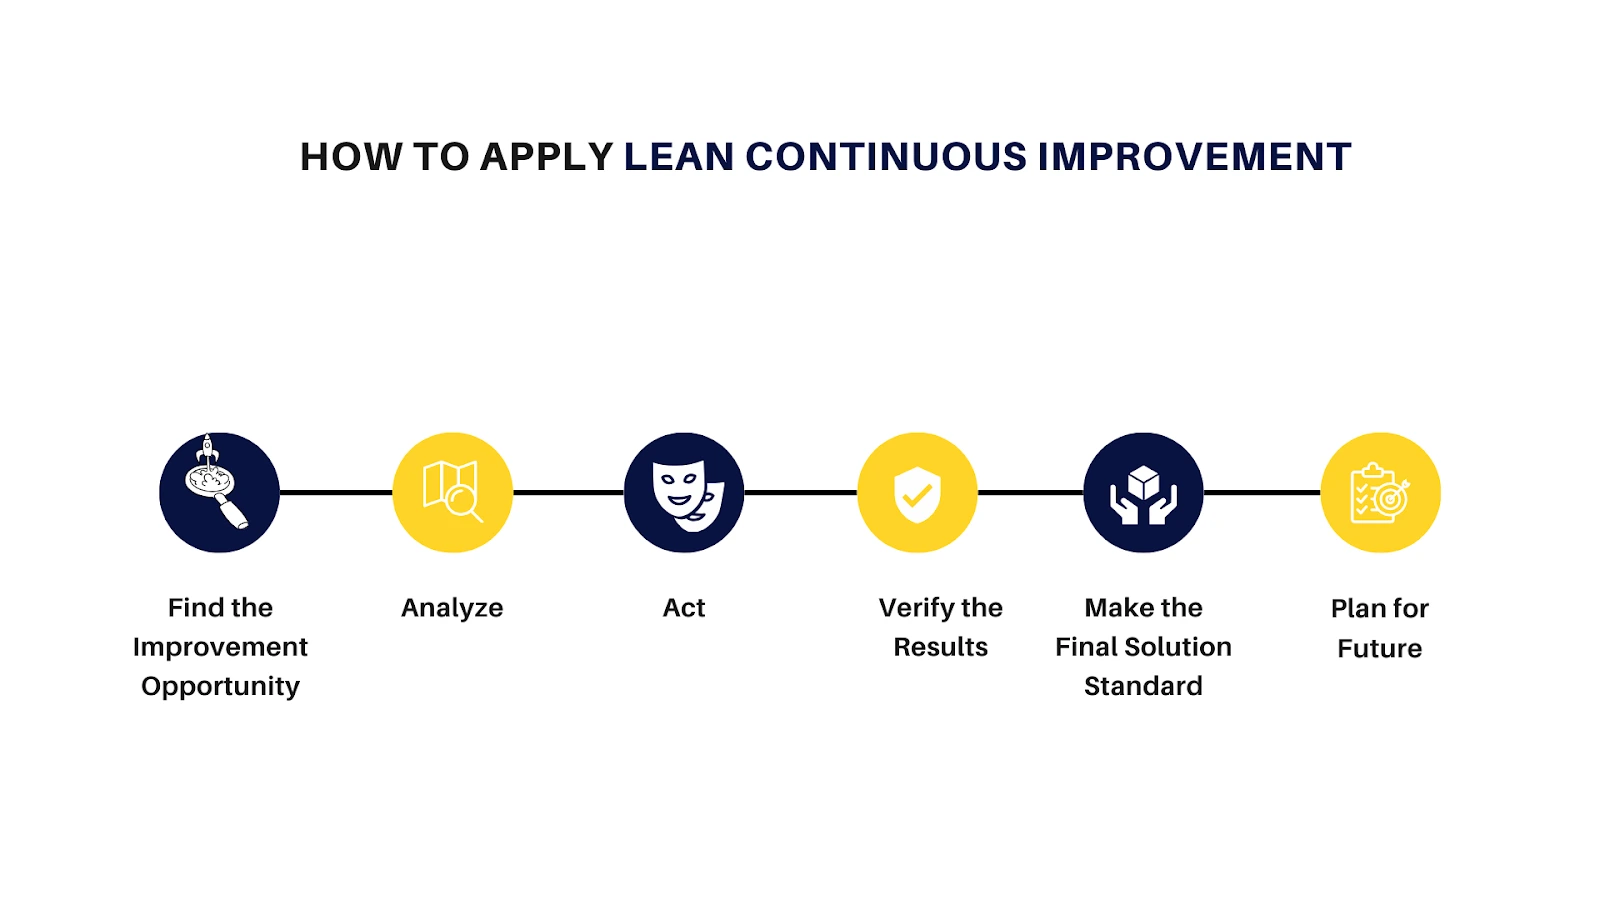 This Image Depicts How to Apply Lean Continuous Improvement